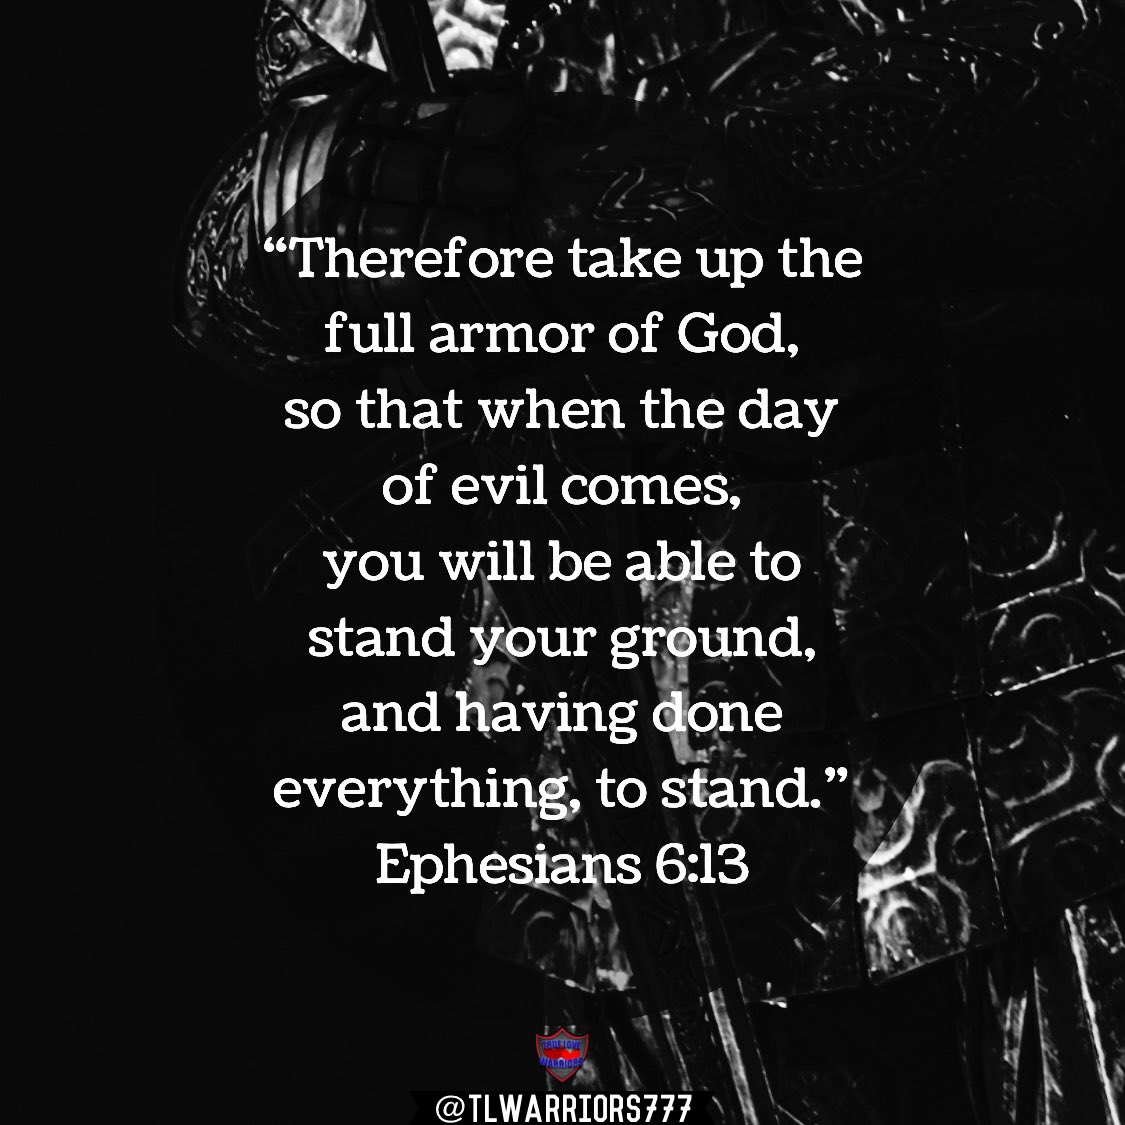 “Therefore take up the full armor of God, so that when the day of evil comes, you will be able to stand your ground, and having done everything, to stand.” Ephesians 6:13